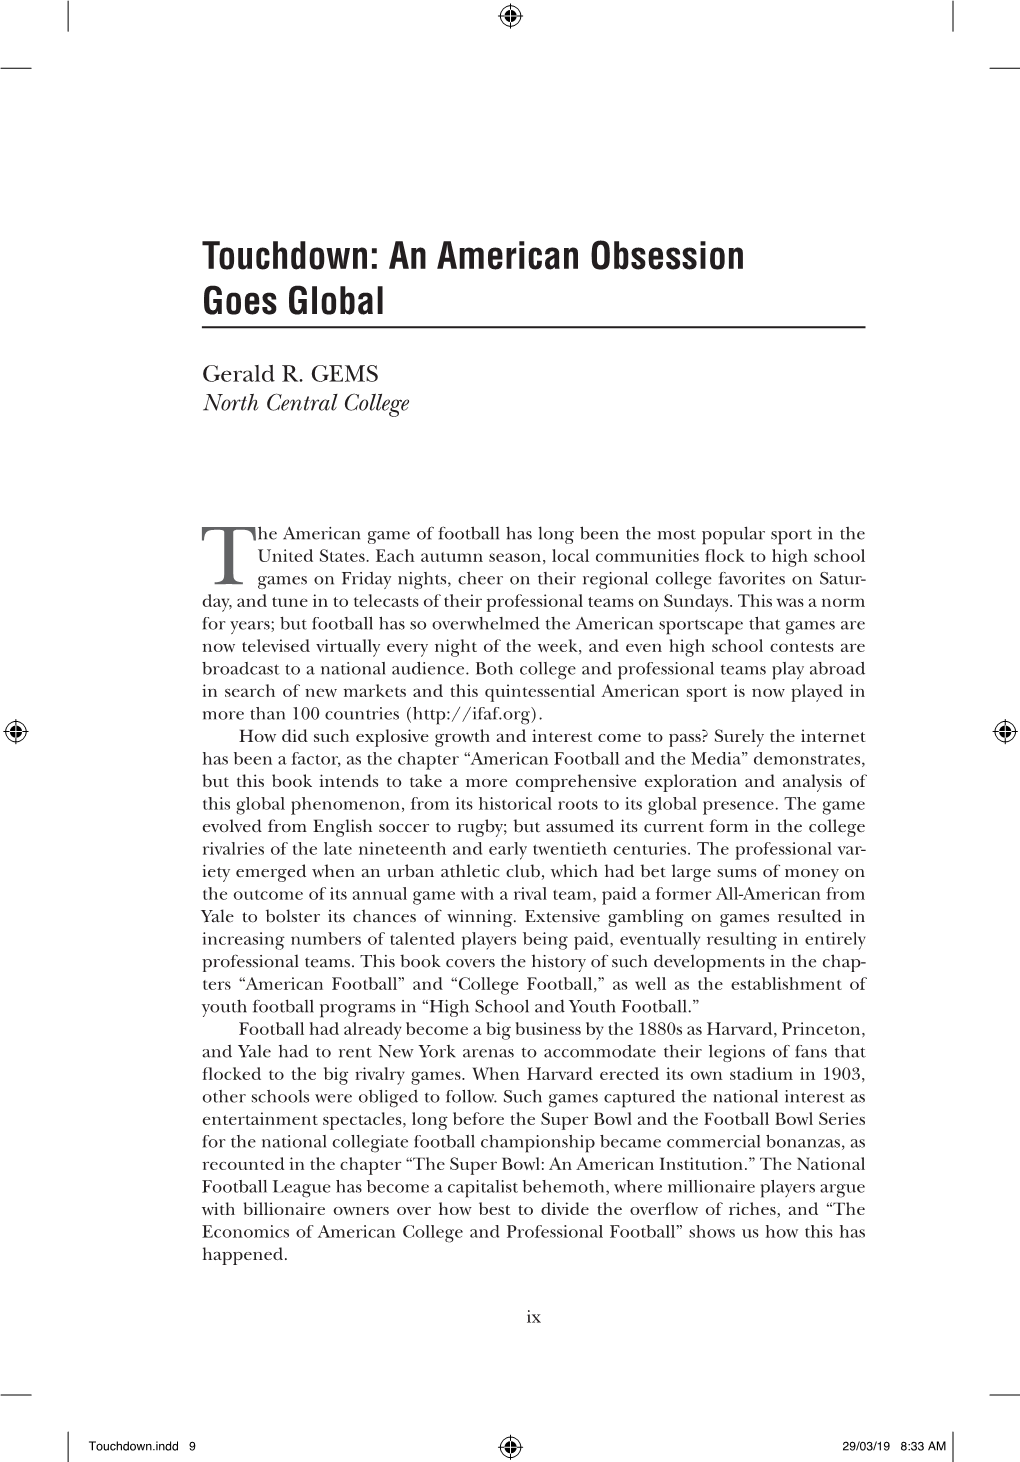 Touchdown: an American Obsession Goes Global